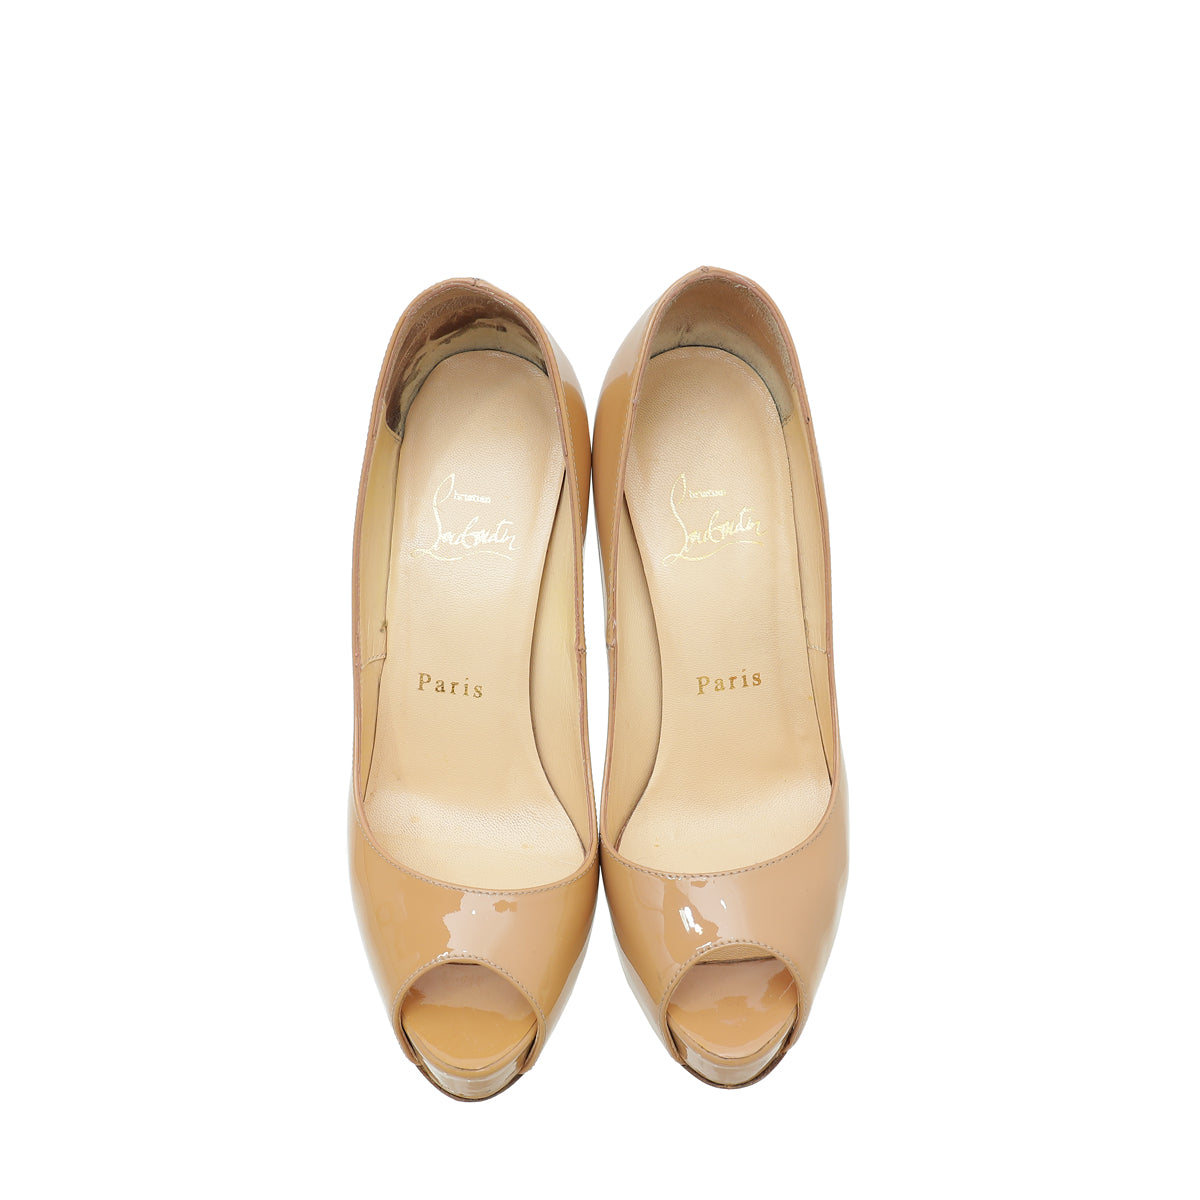 Christian Louboutin Nude New Very Prive 120 Pumps 36